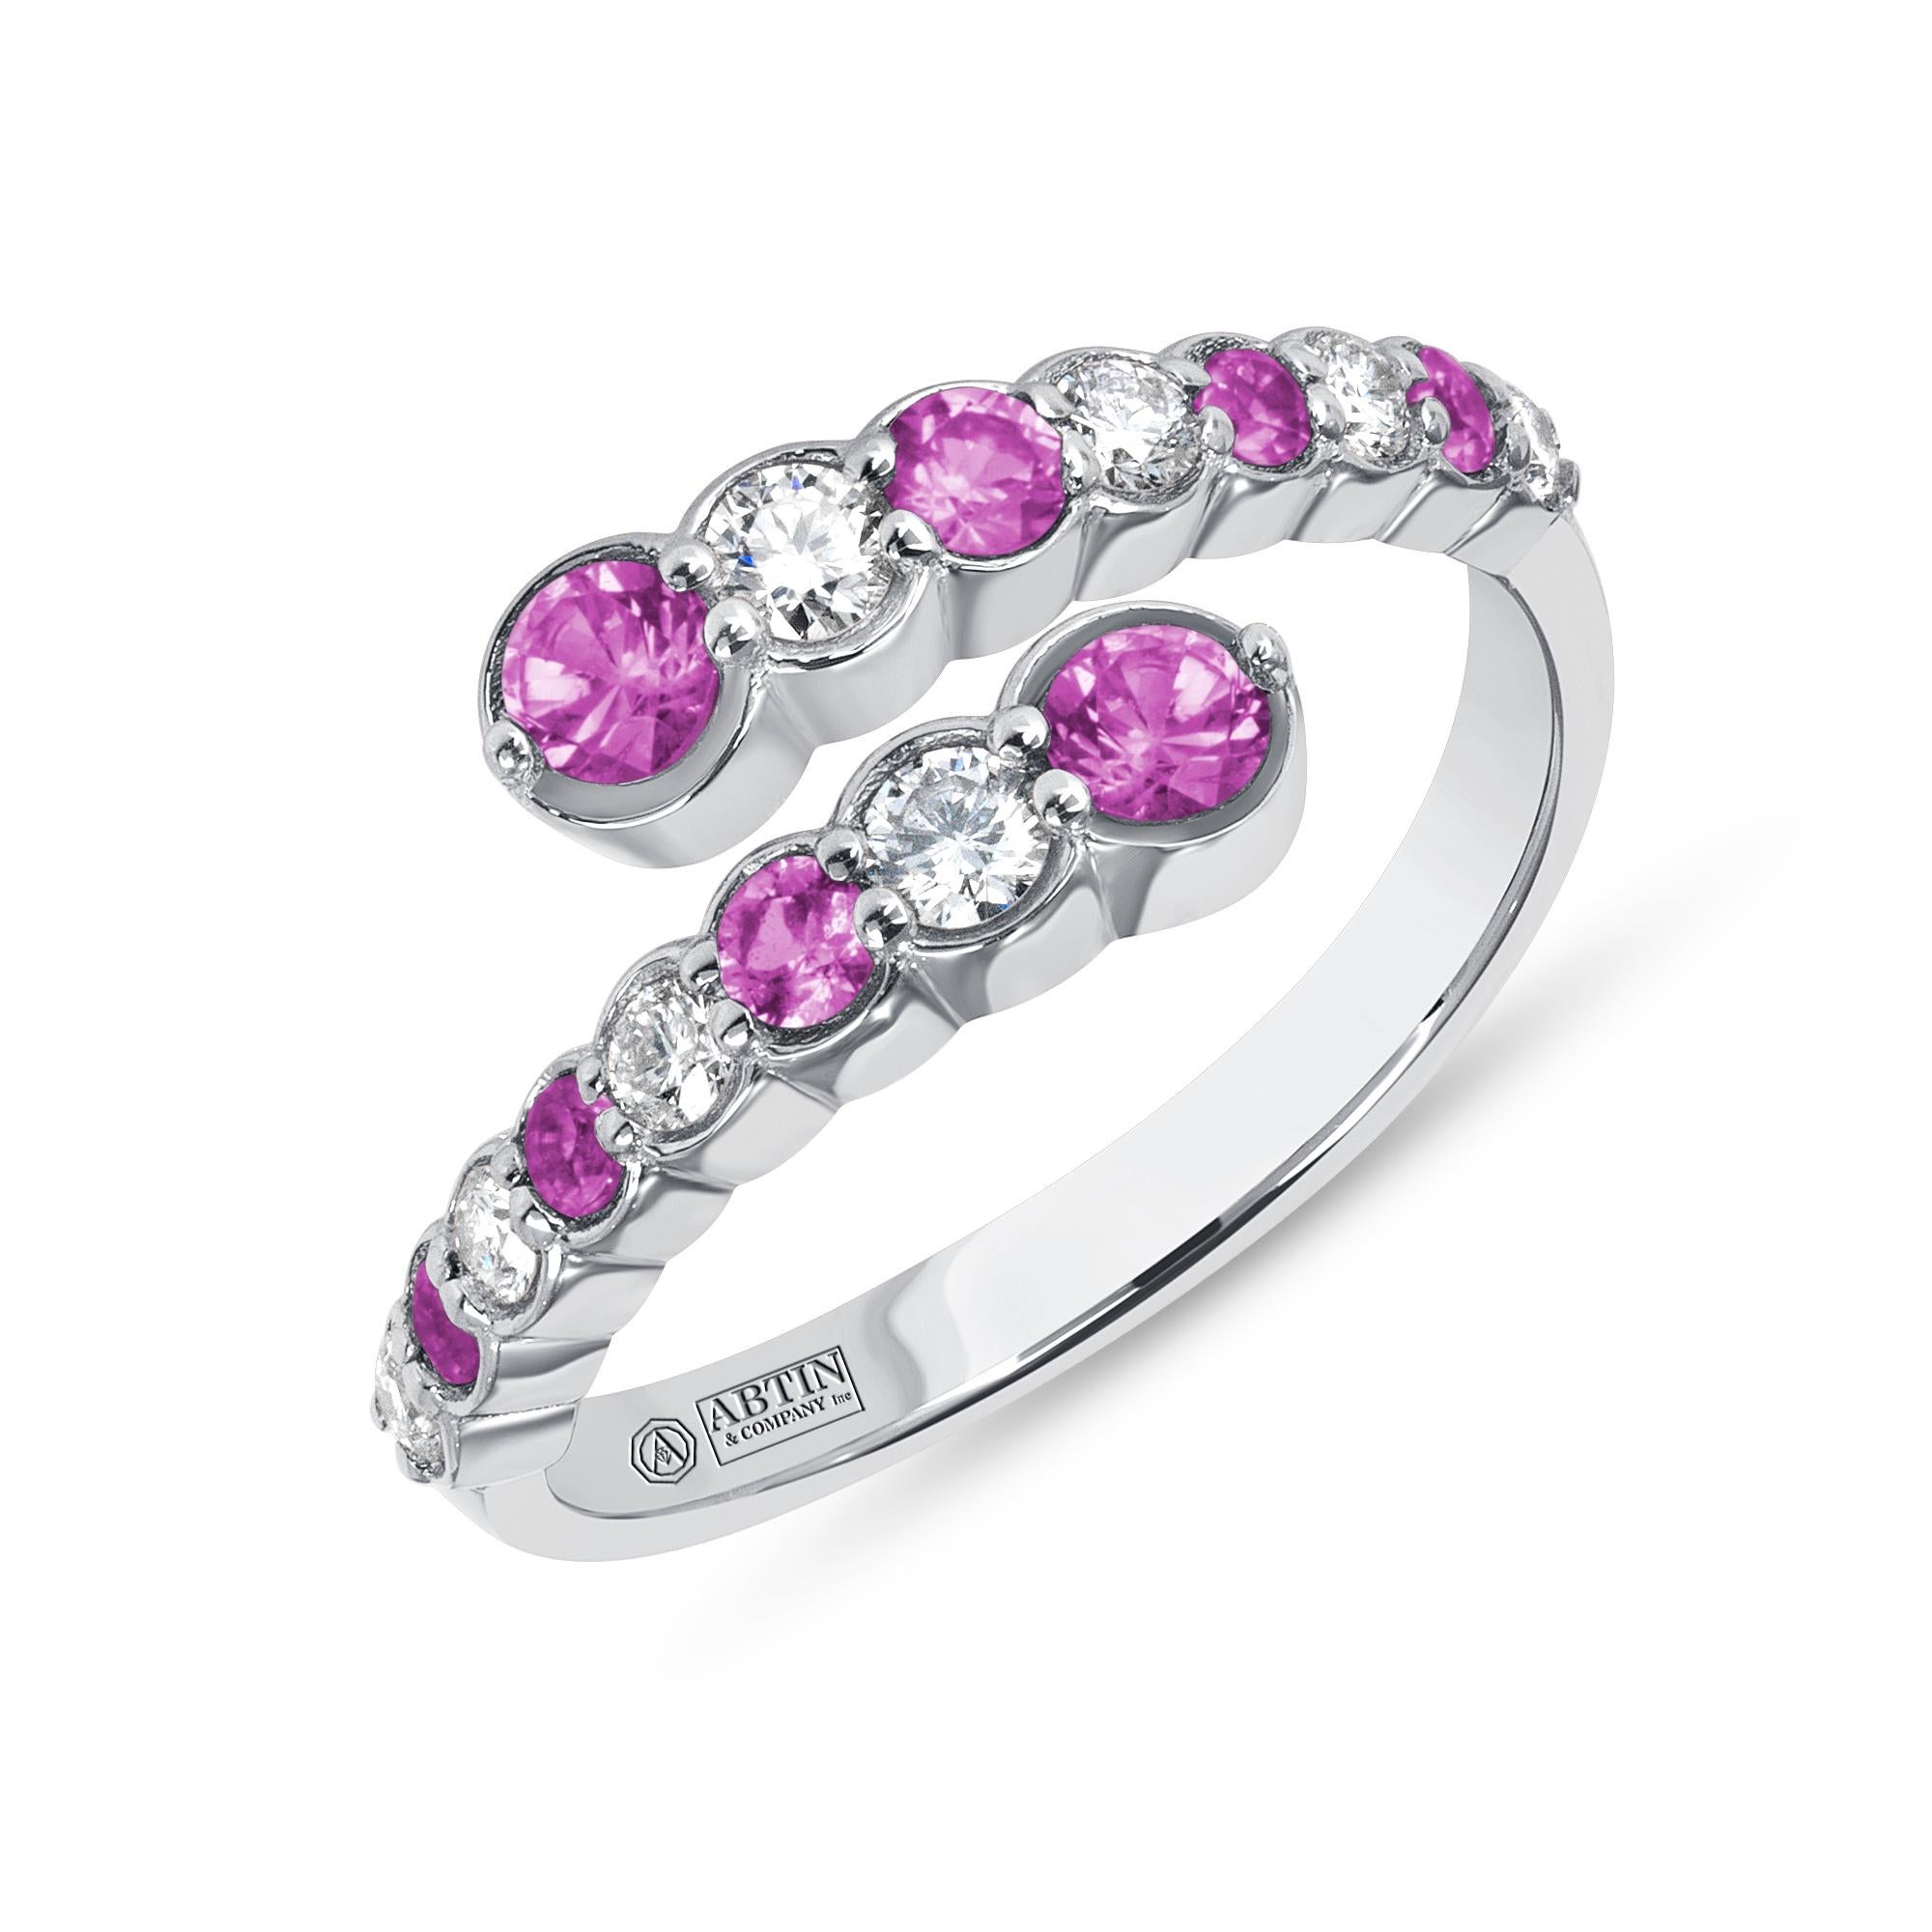 Crafted in 14K gold this ring features a clean and contemporary design. This modern and stylish open bypass alternating ring is set with mesmerizing round-cut diamonds and genuine amethyst gemstones. Stack it with your stacking rings or wear it solo